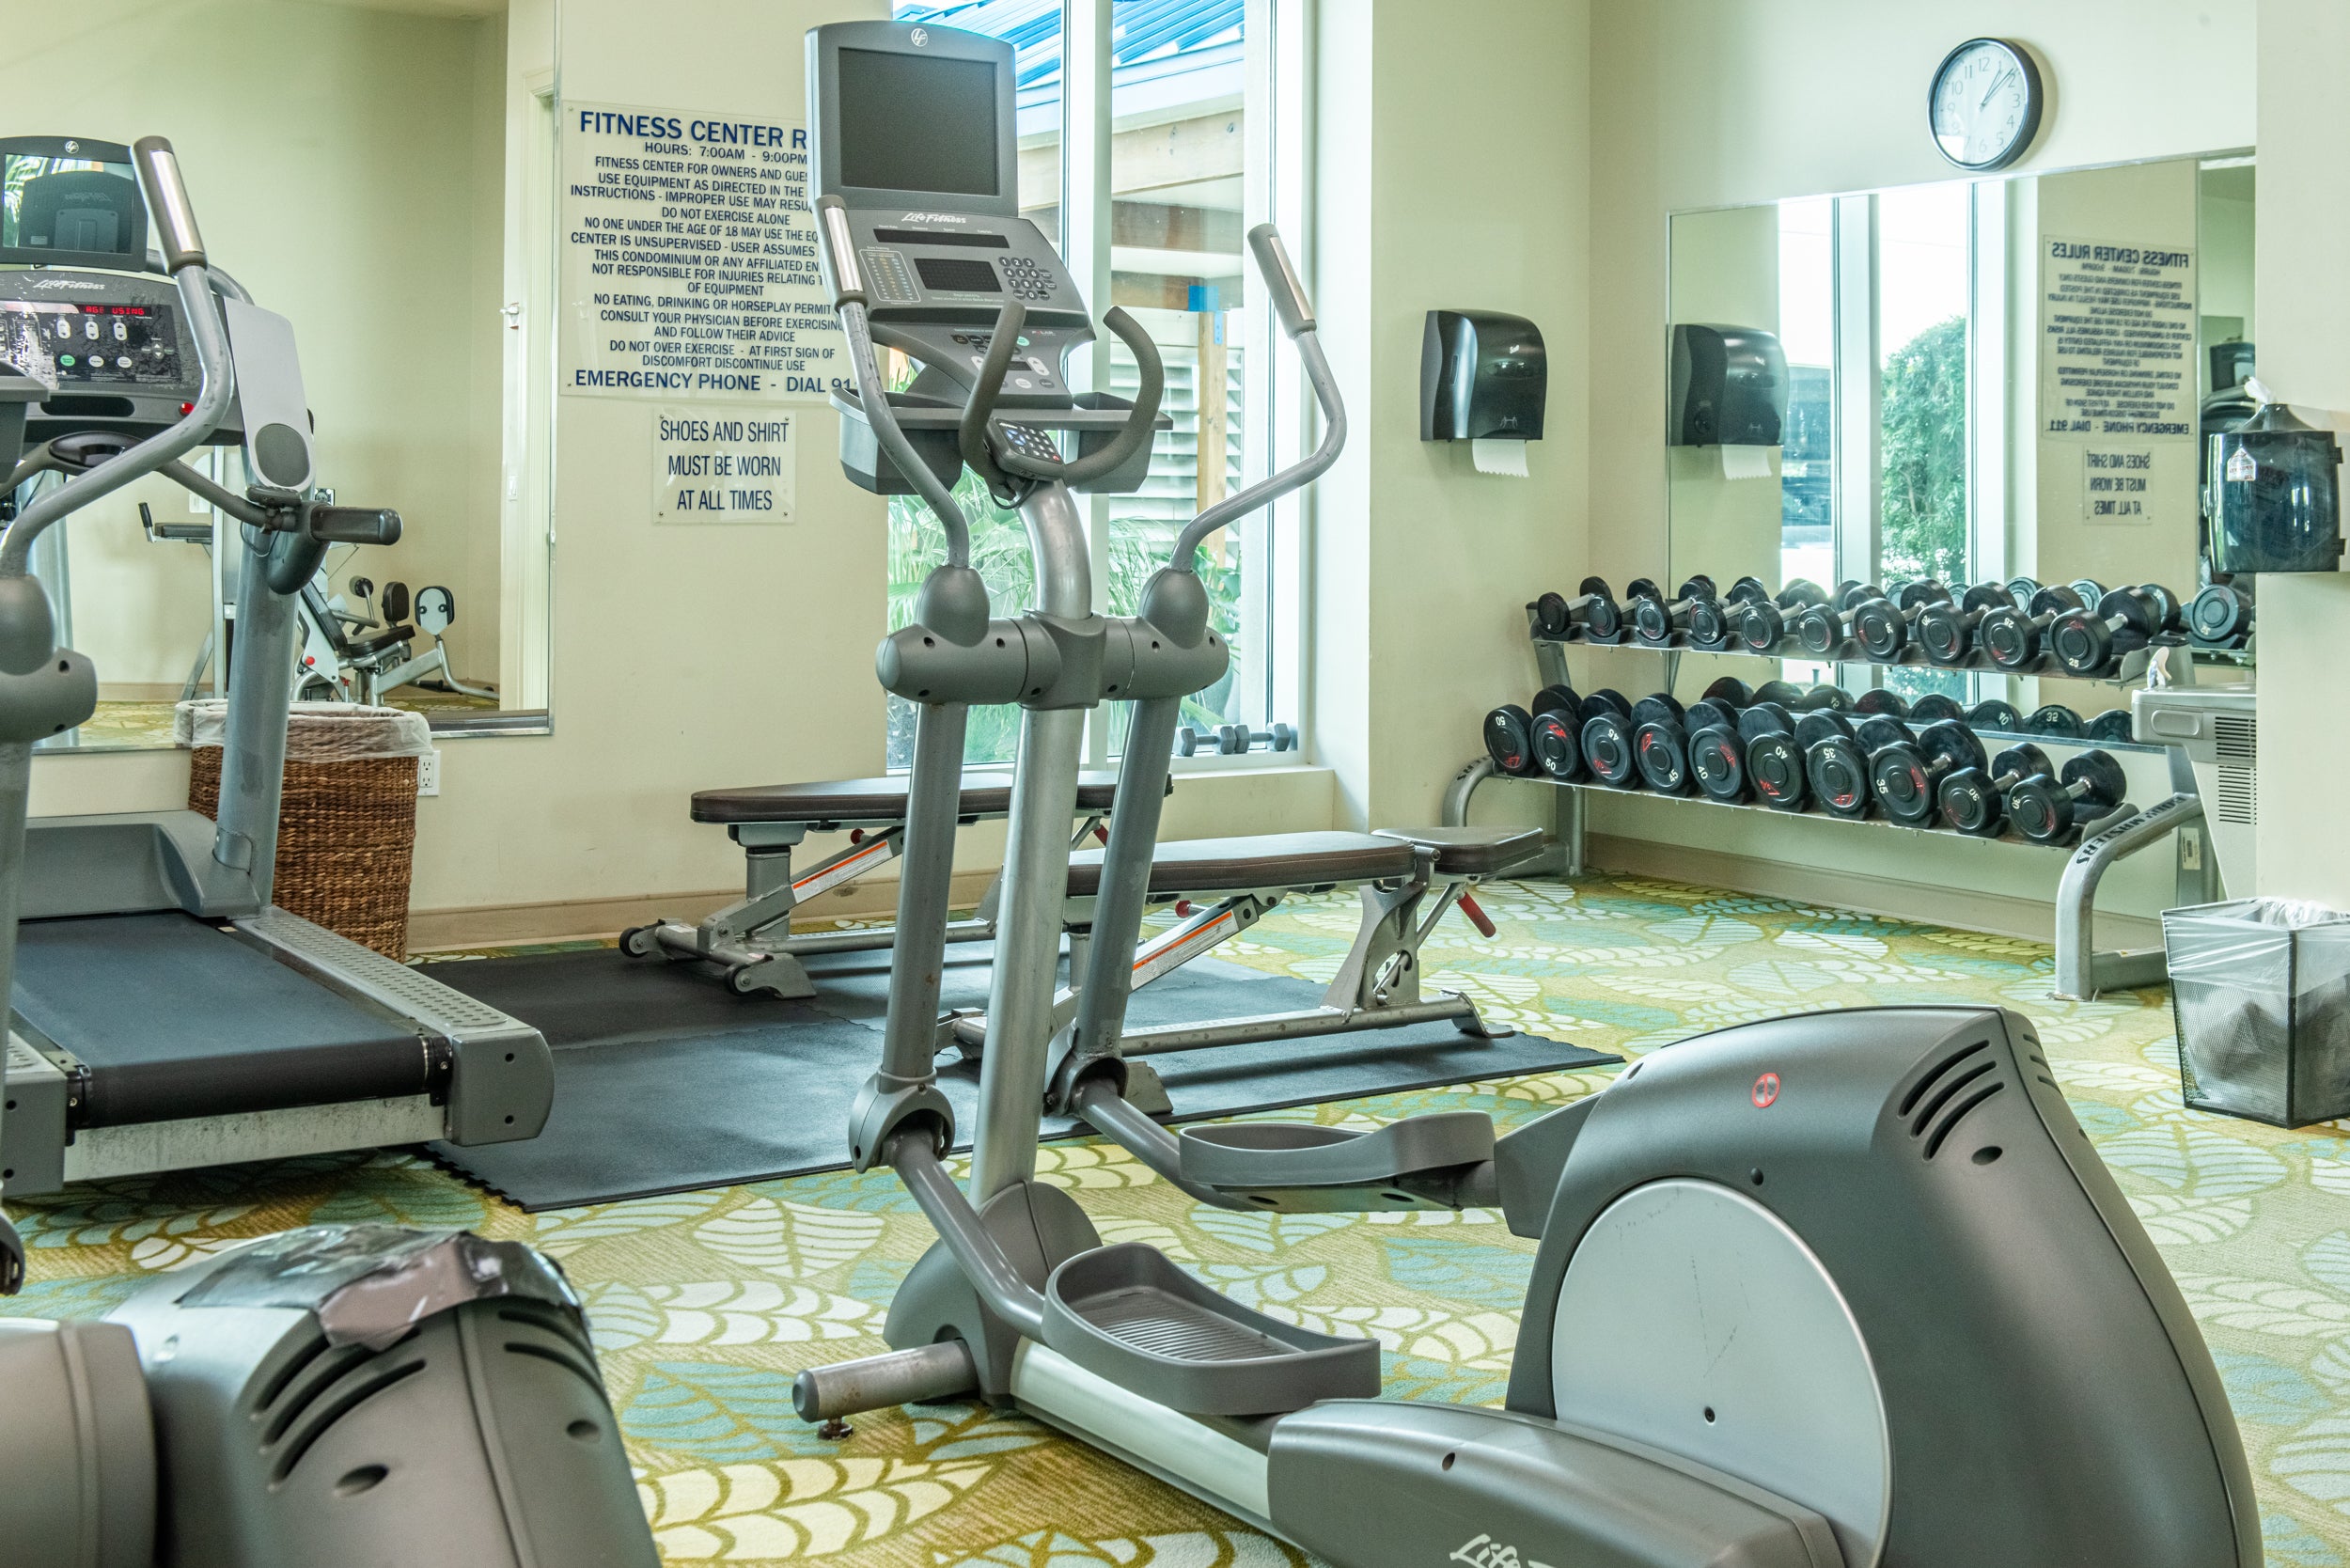 Free Weight area in Fitness Center 